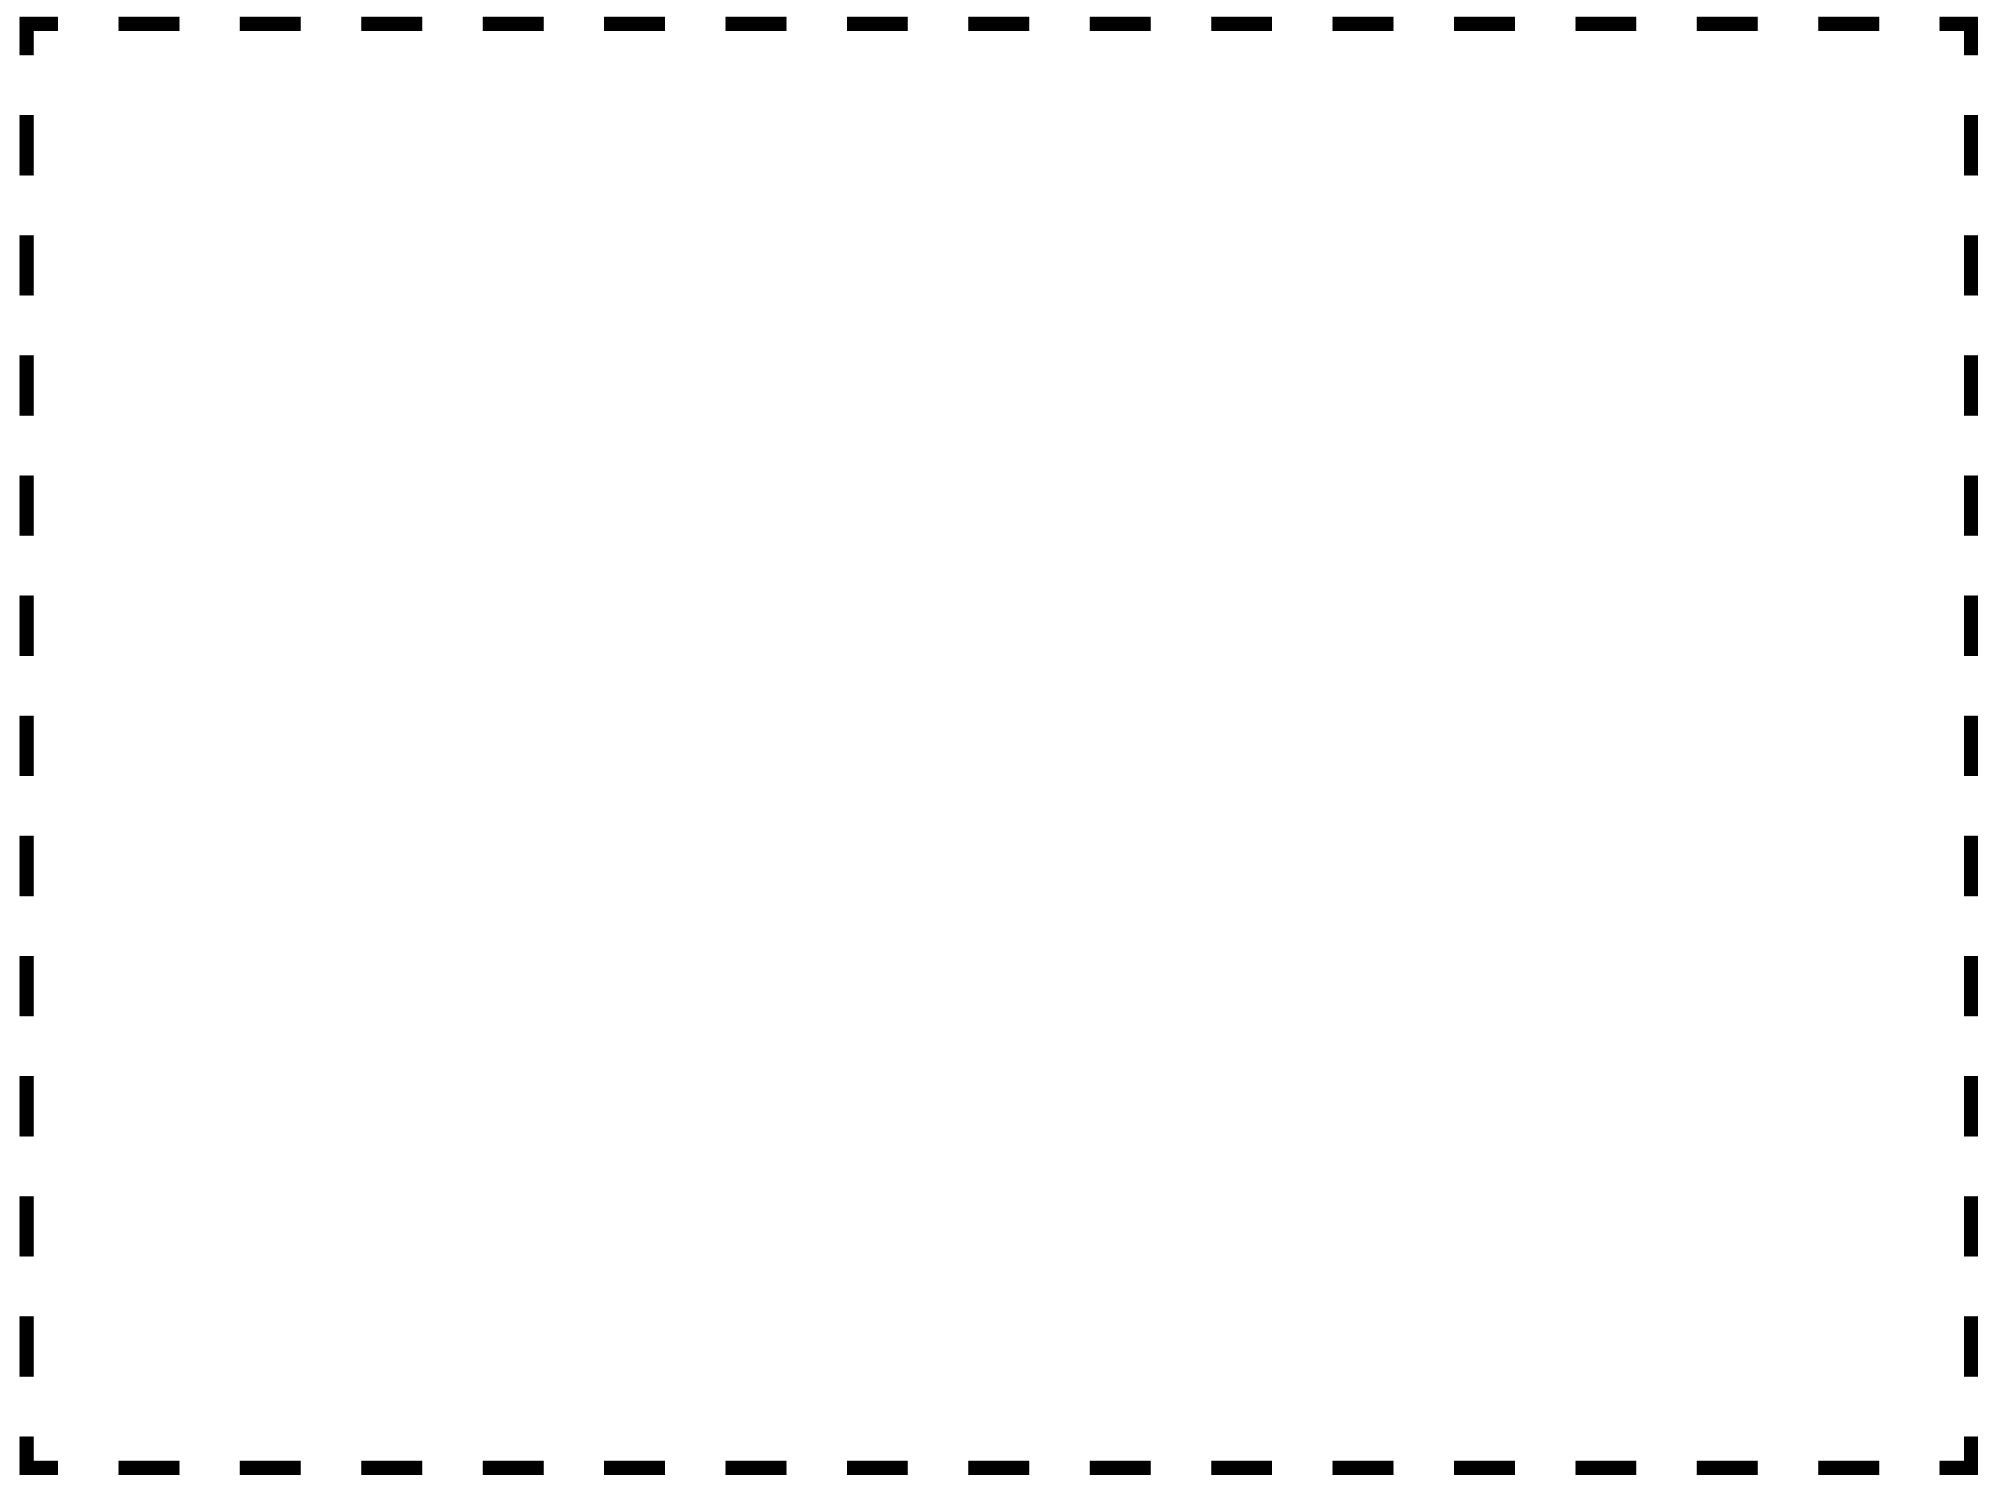 636-1940-coupon-outline-4x3-k.png